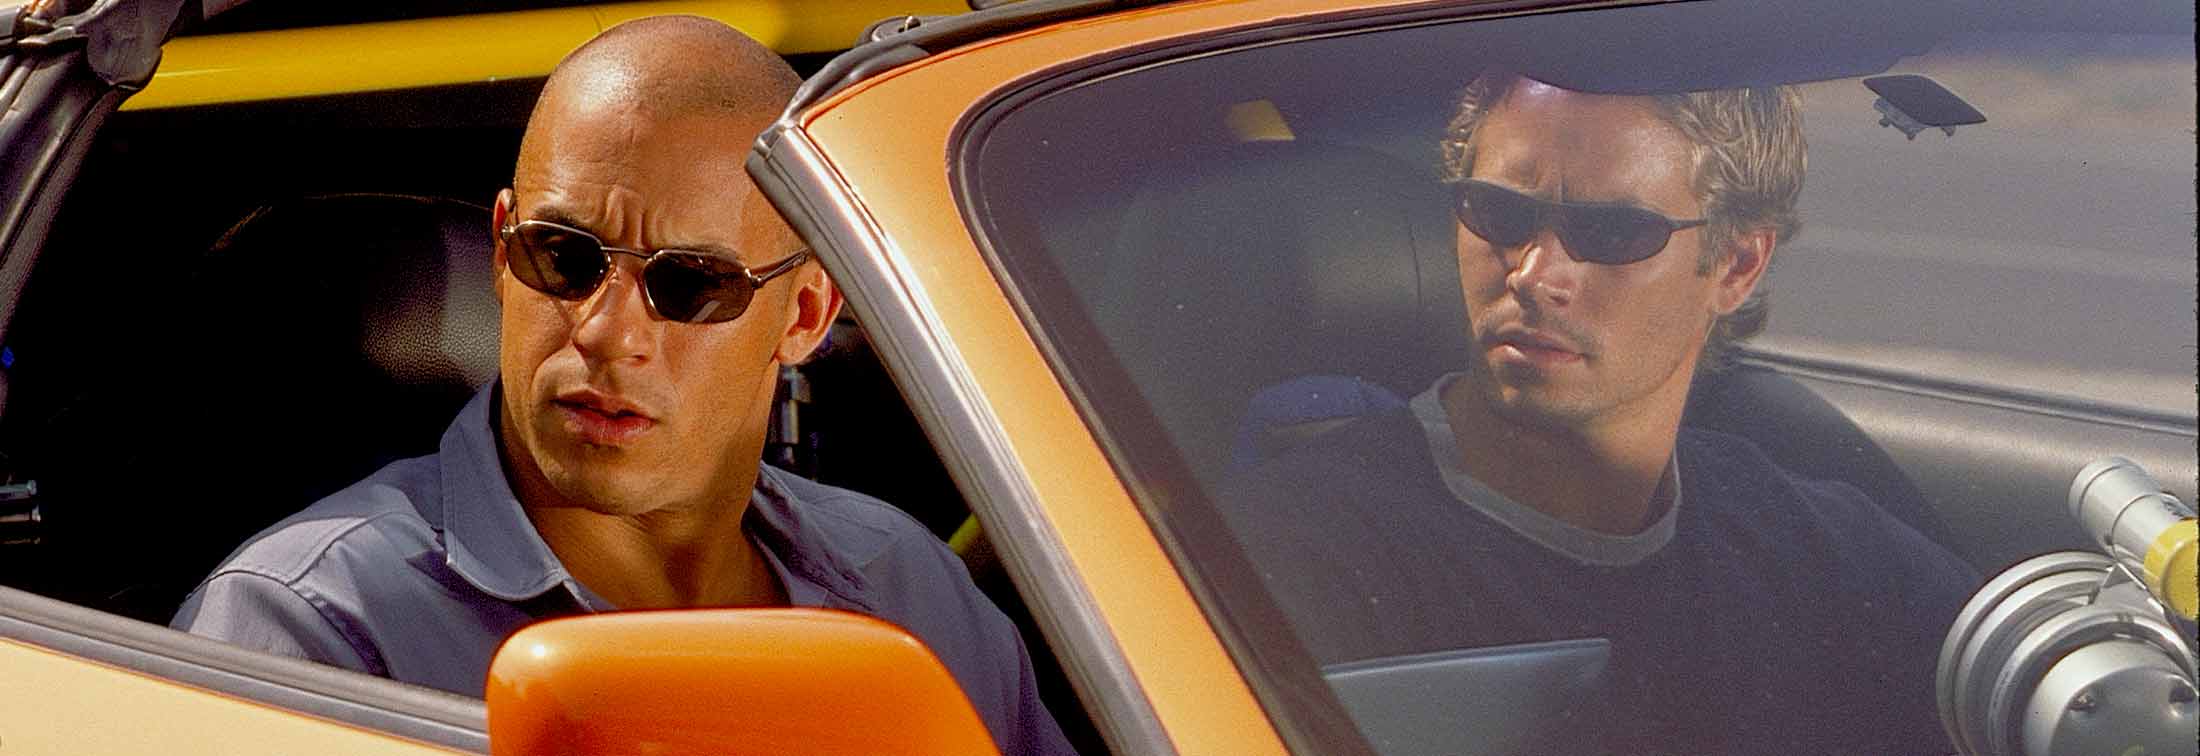 The Fast and the Furious - 20 years since family shifted into gear